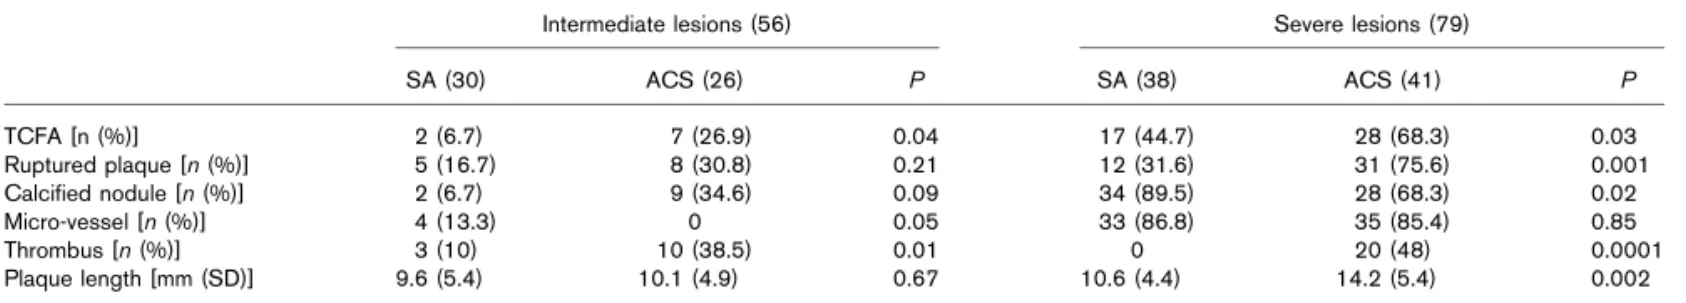 Table 5 Events at 1-year follow-up in patients treated with percutaneous coronary intervention vs